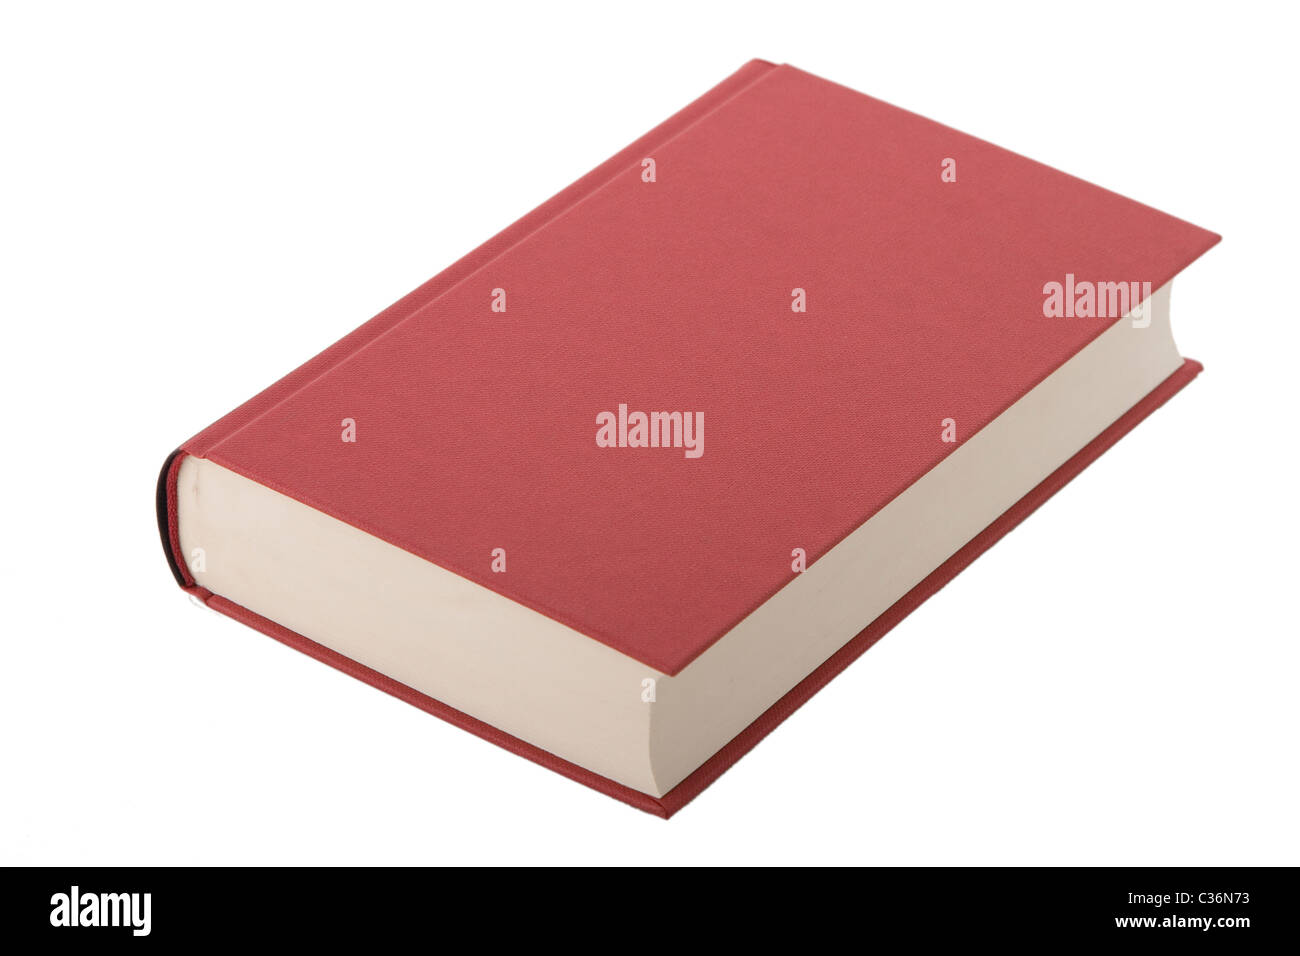 Brand new red hardcover book with blank cover Stock Photo